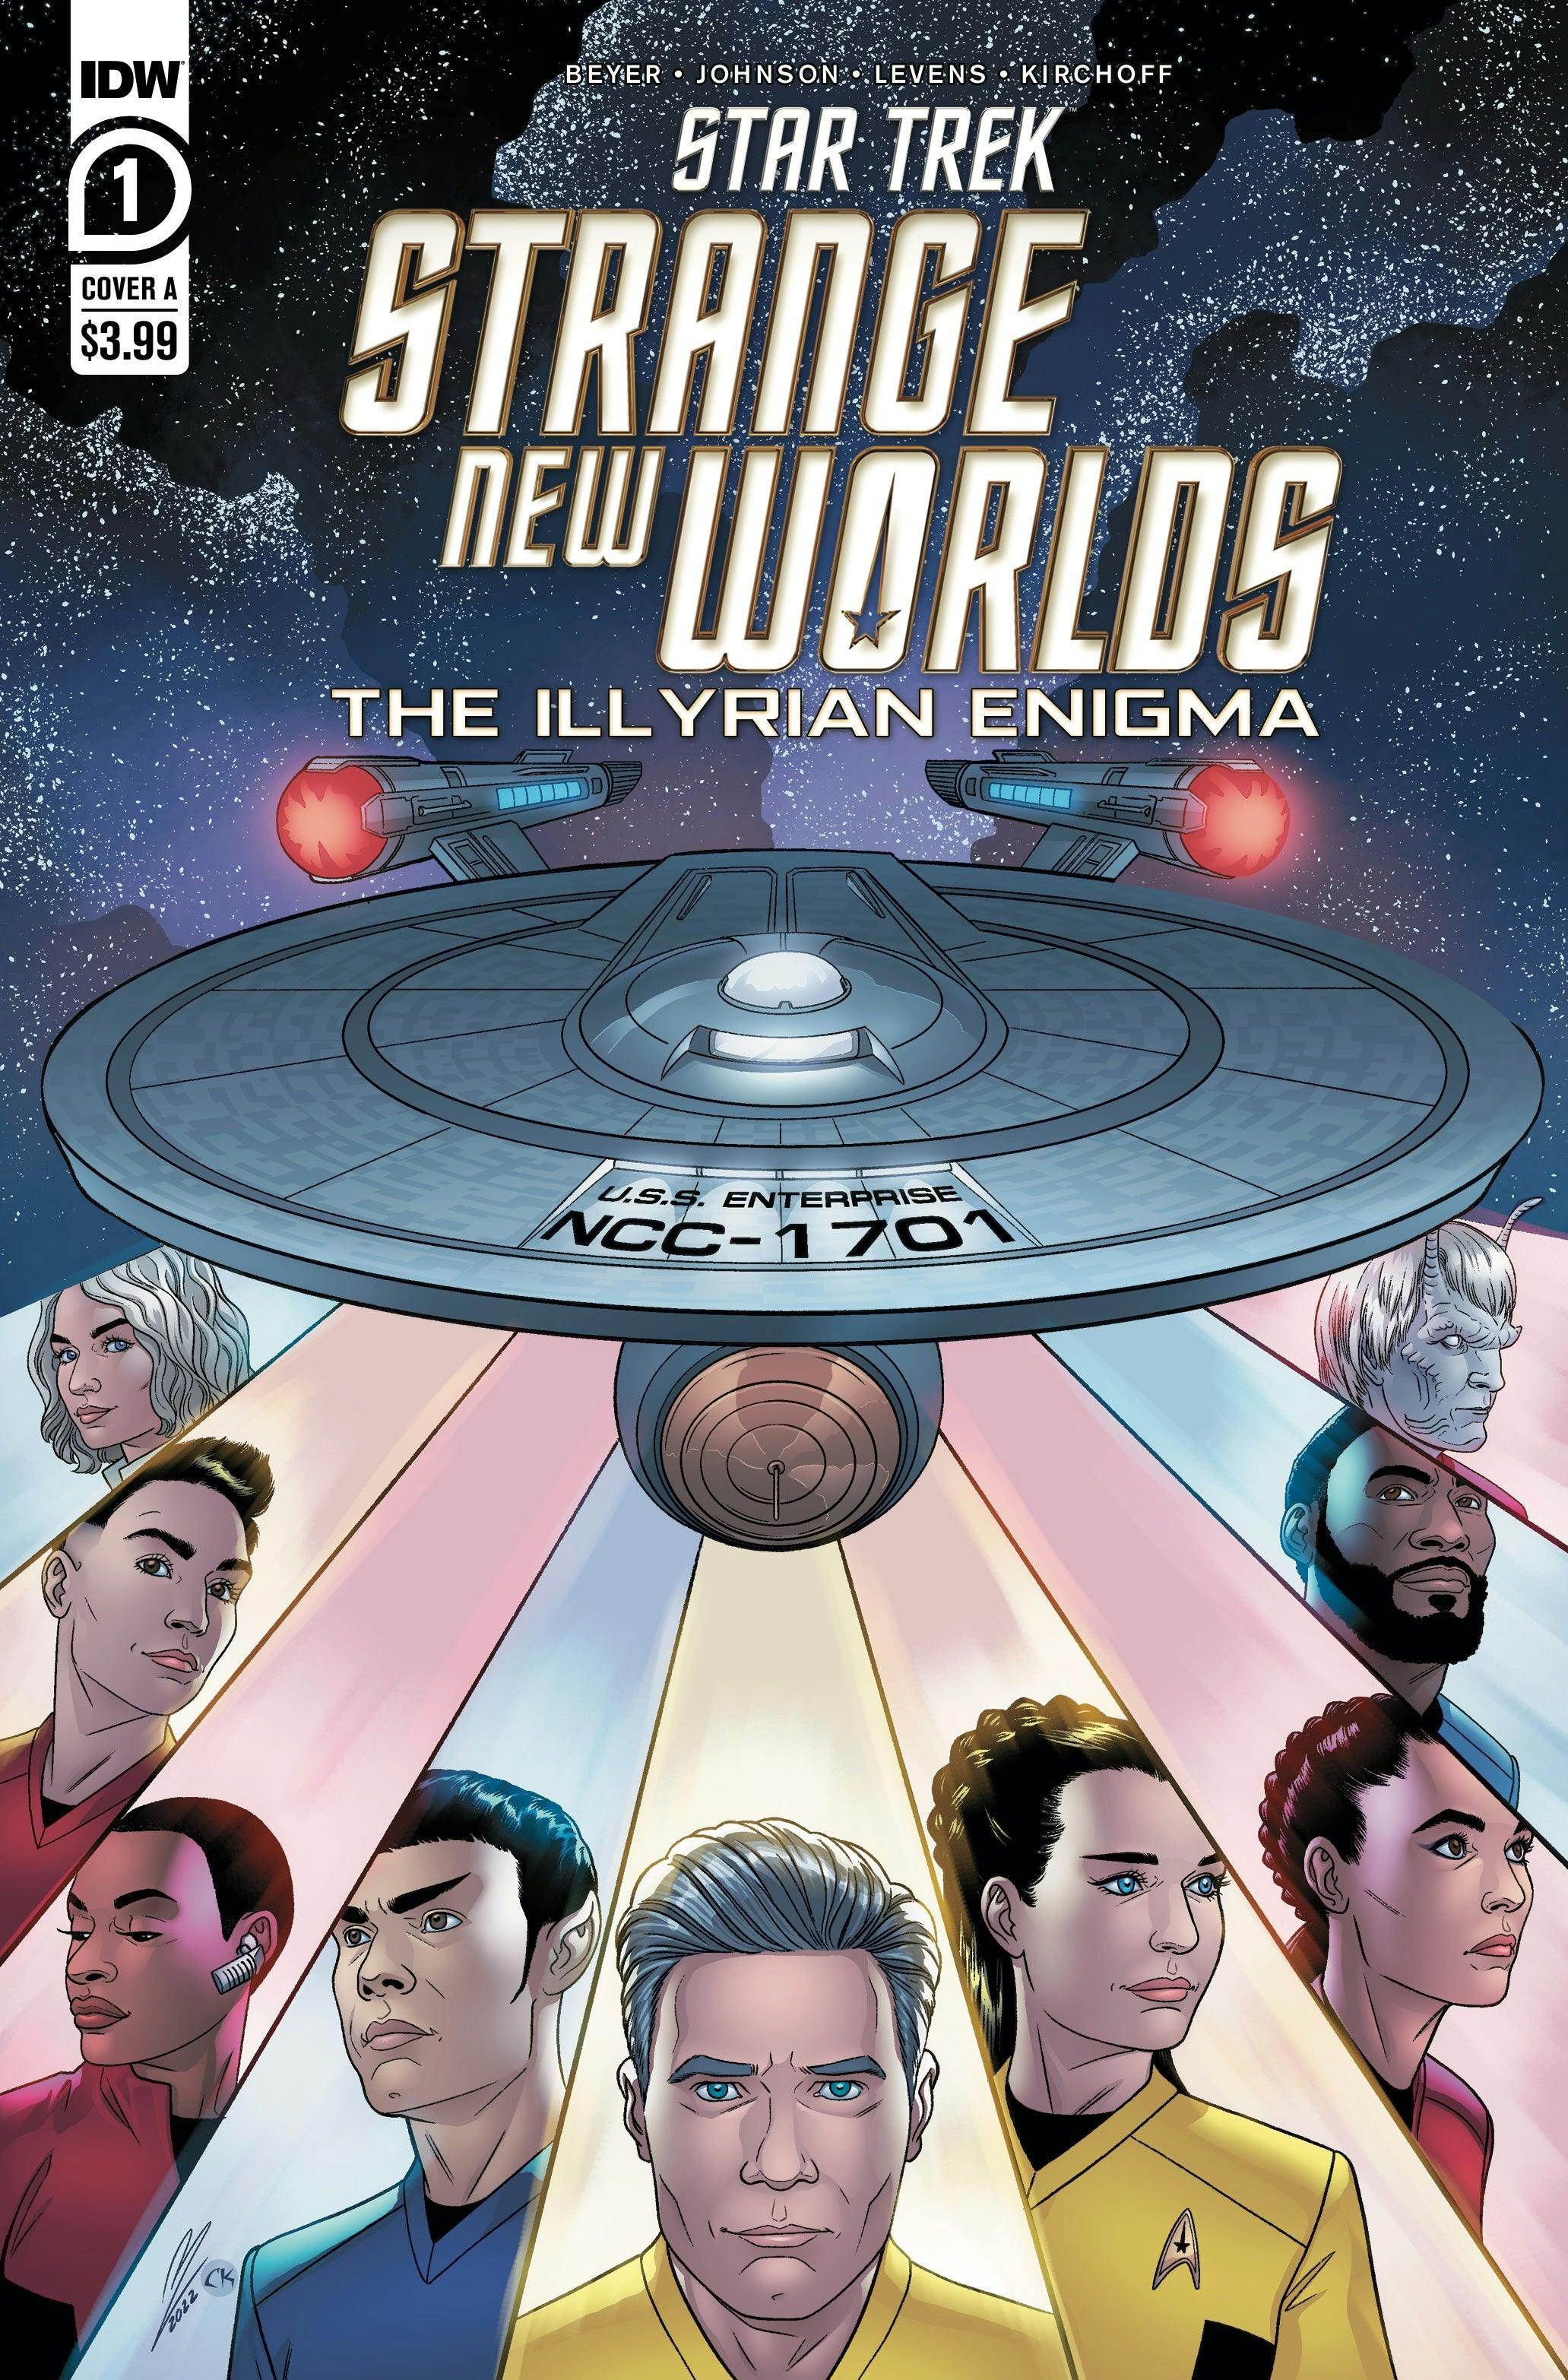 STAR TREK: STRANGE NEW WORLDS – THE ILLYRIAN ENIGMA #1 Cover A art by Megan Levens